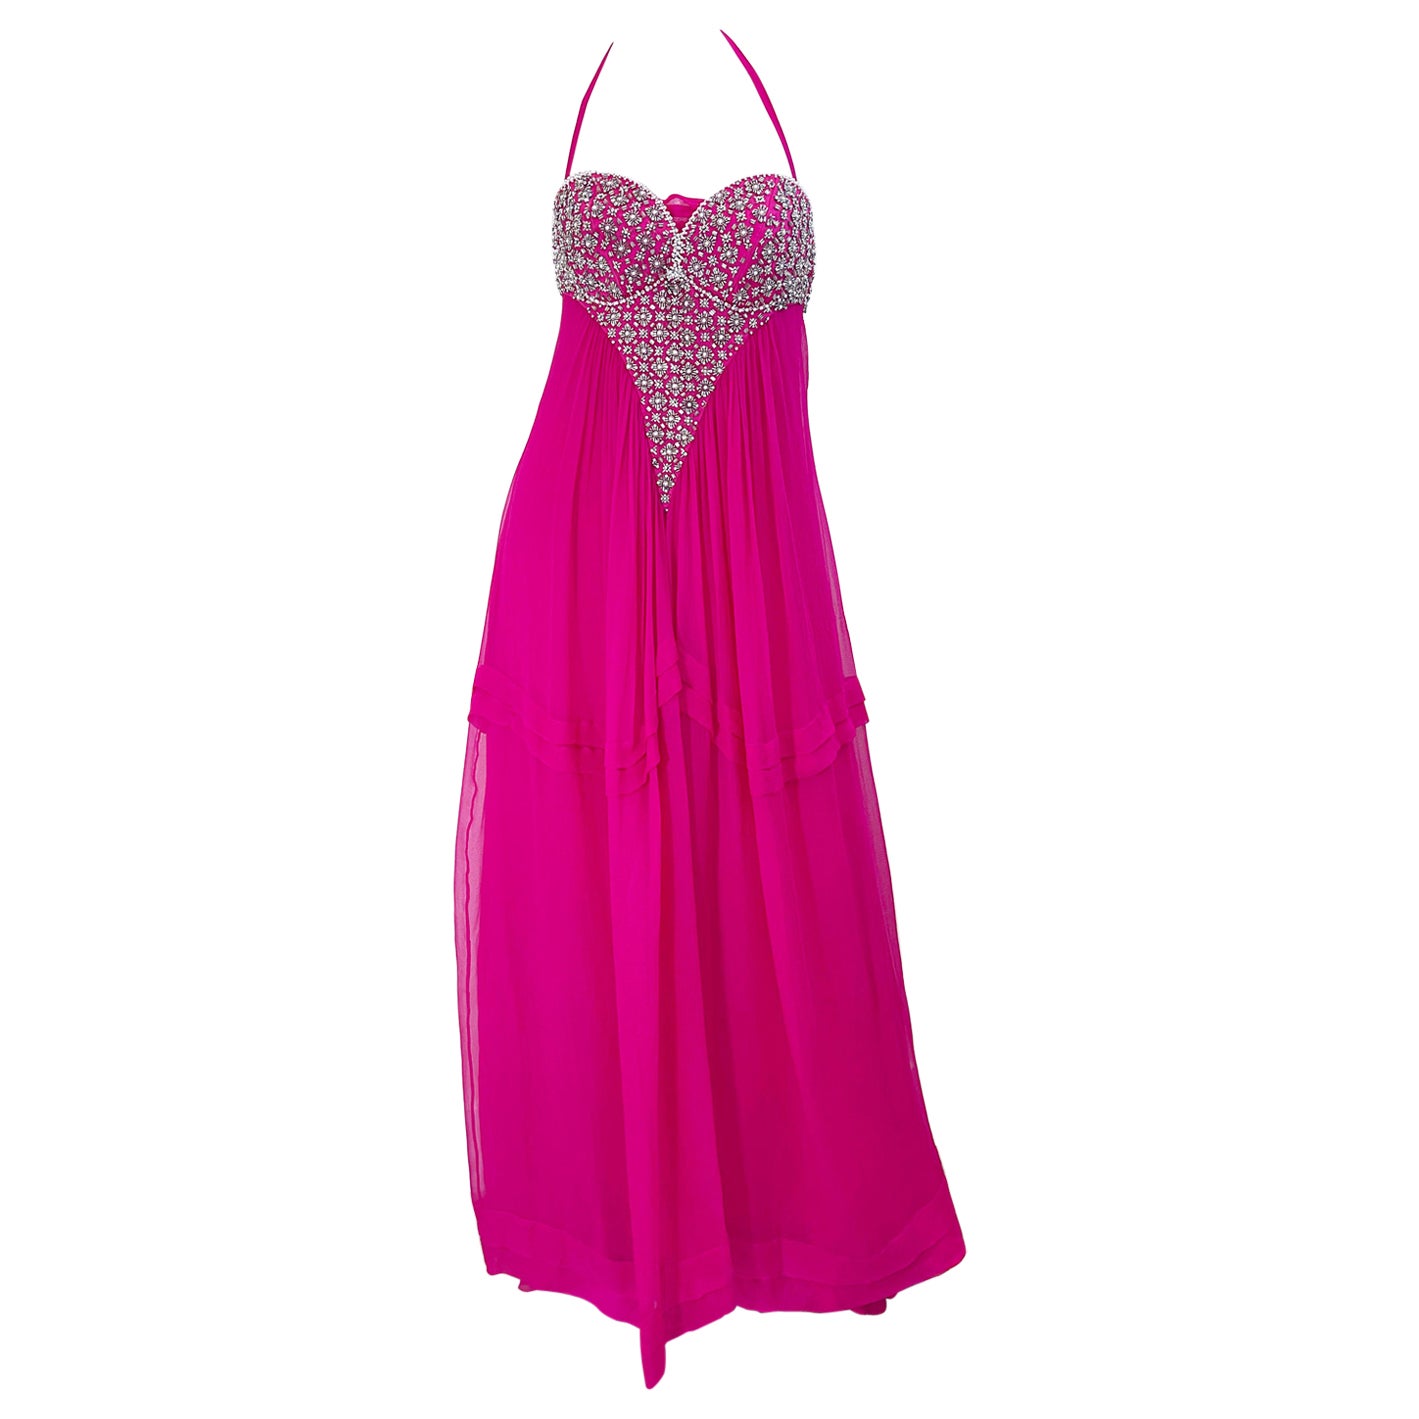 1990s Roberto Cavalli Size 44 / US 8 Hot Pink Chiffon Beaded Rhinestone 90s Gown For Sale